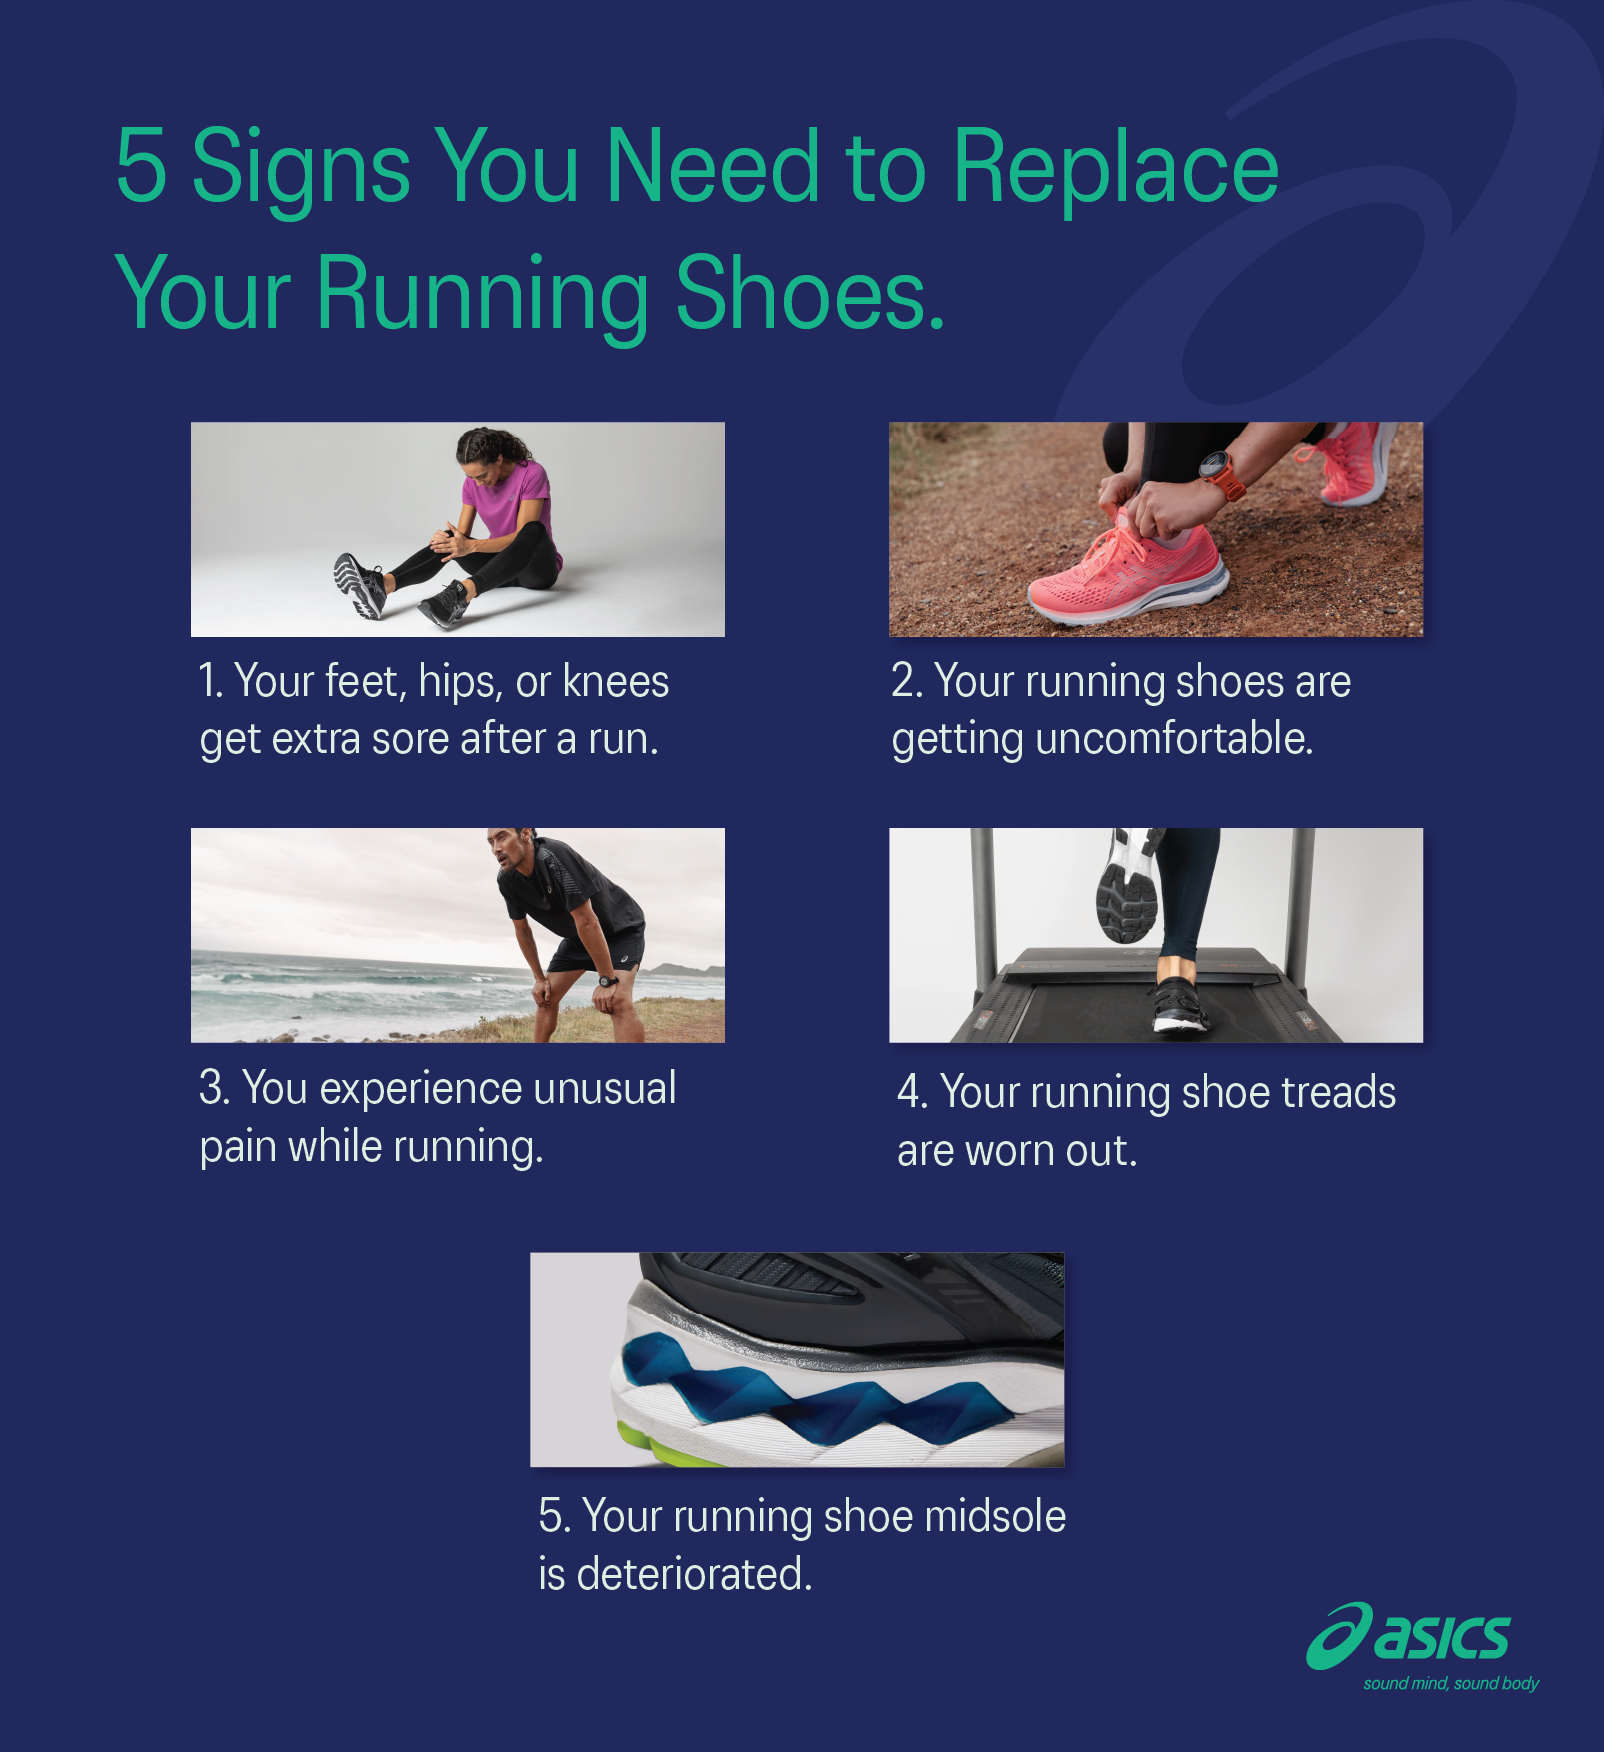 5 Signs You Need to Replace Your Running Shoes